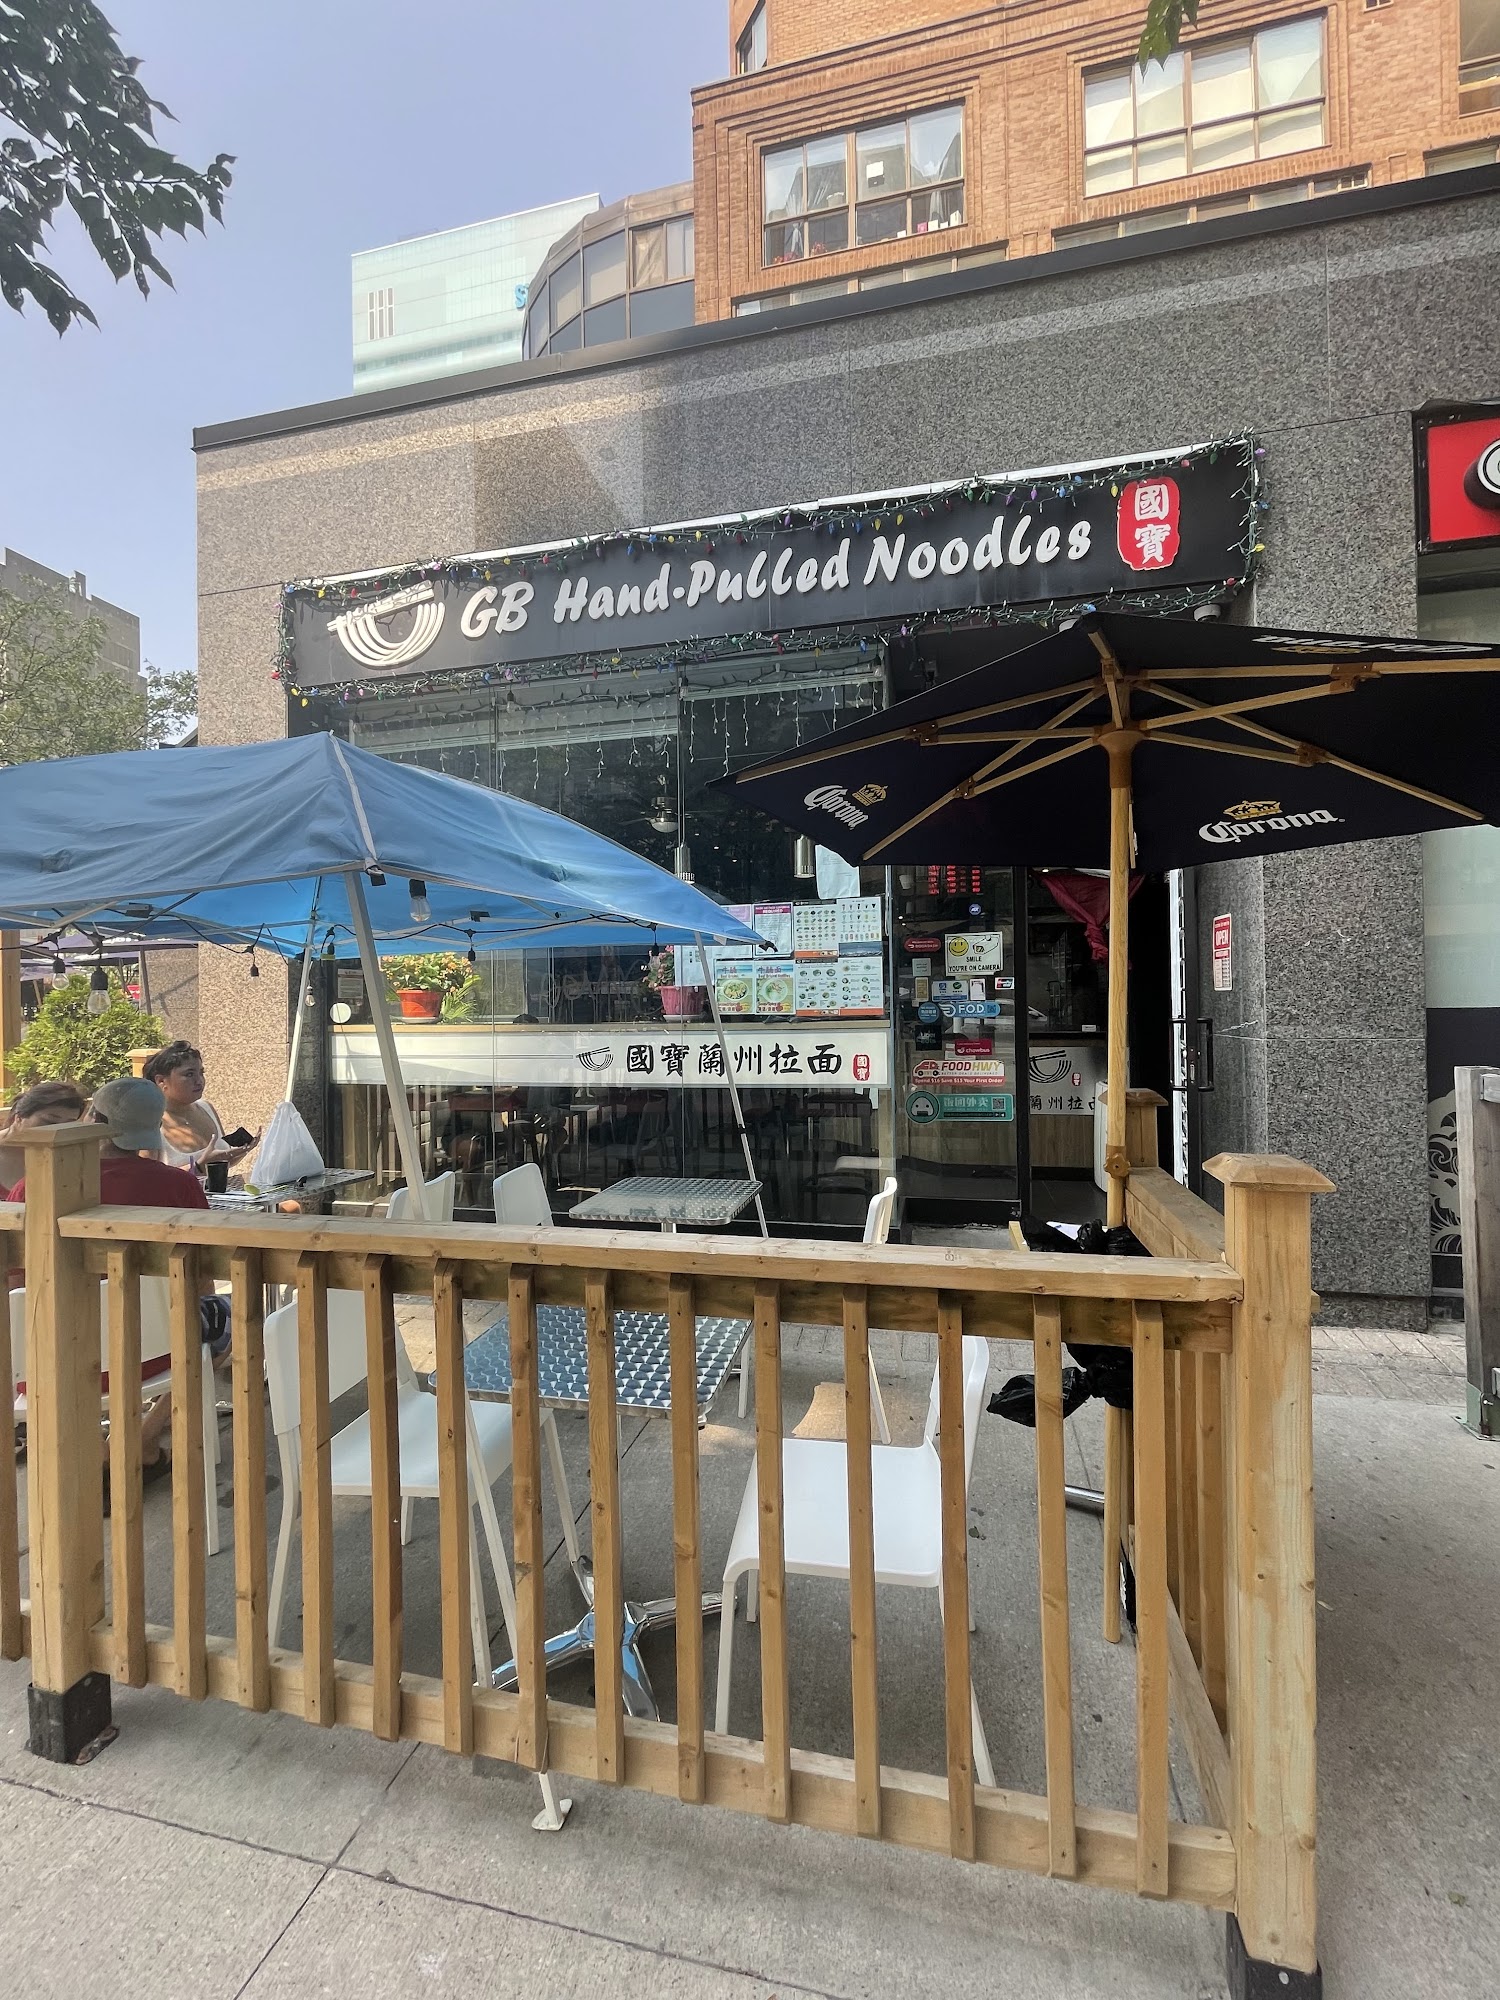 GB Hand-Pulled Noodles